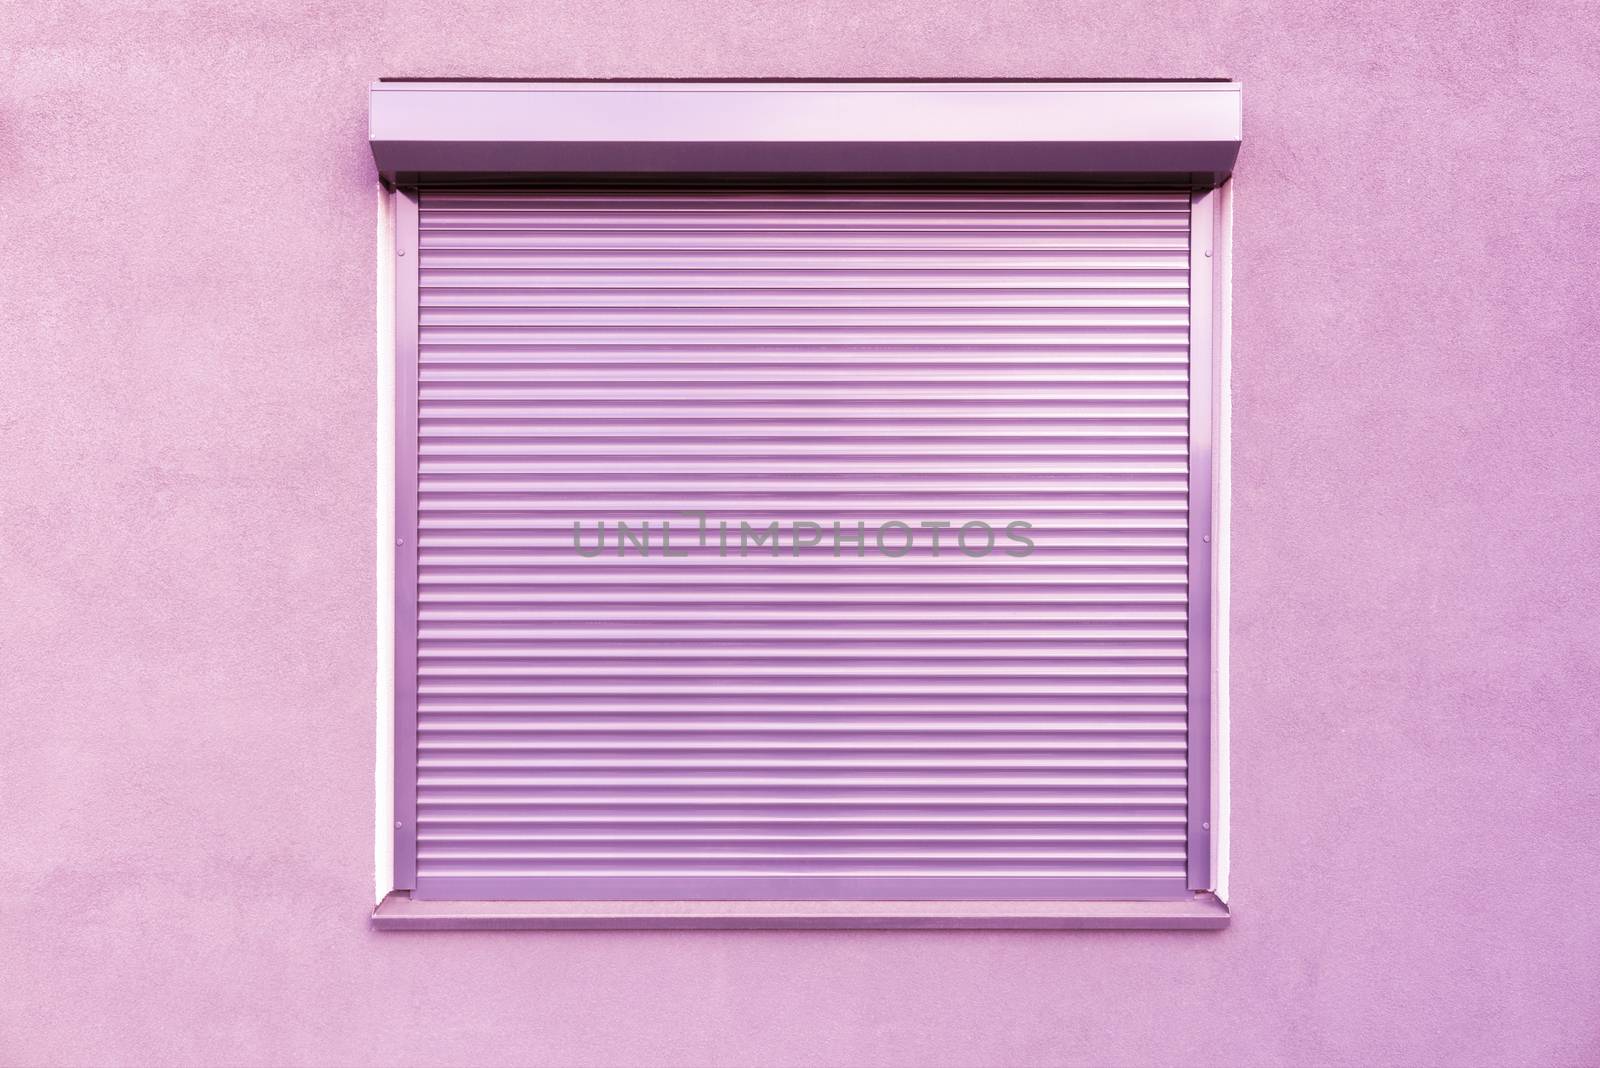 Light pink metal blinds on the windows of the facade of the house.